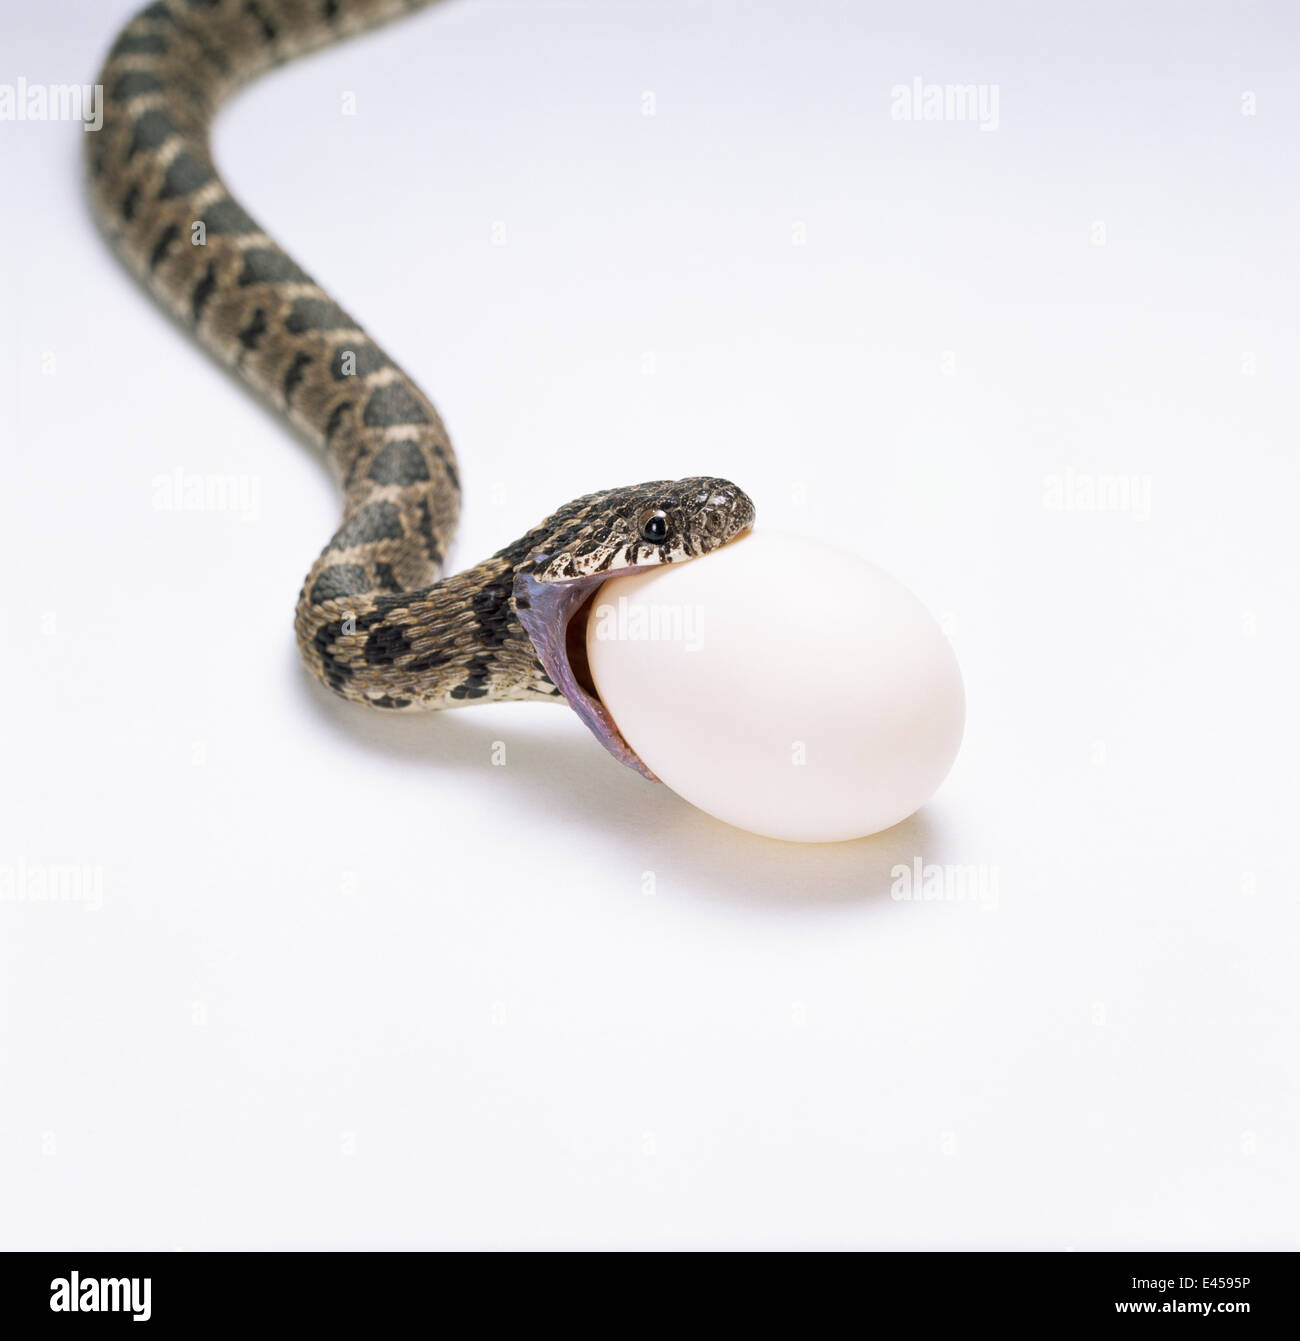 Egg eating snake about to swallow egg, Sequence 1/8 {Dasypeltis scabra} Africa Stock Photo